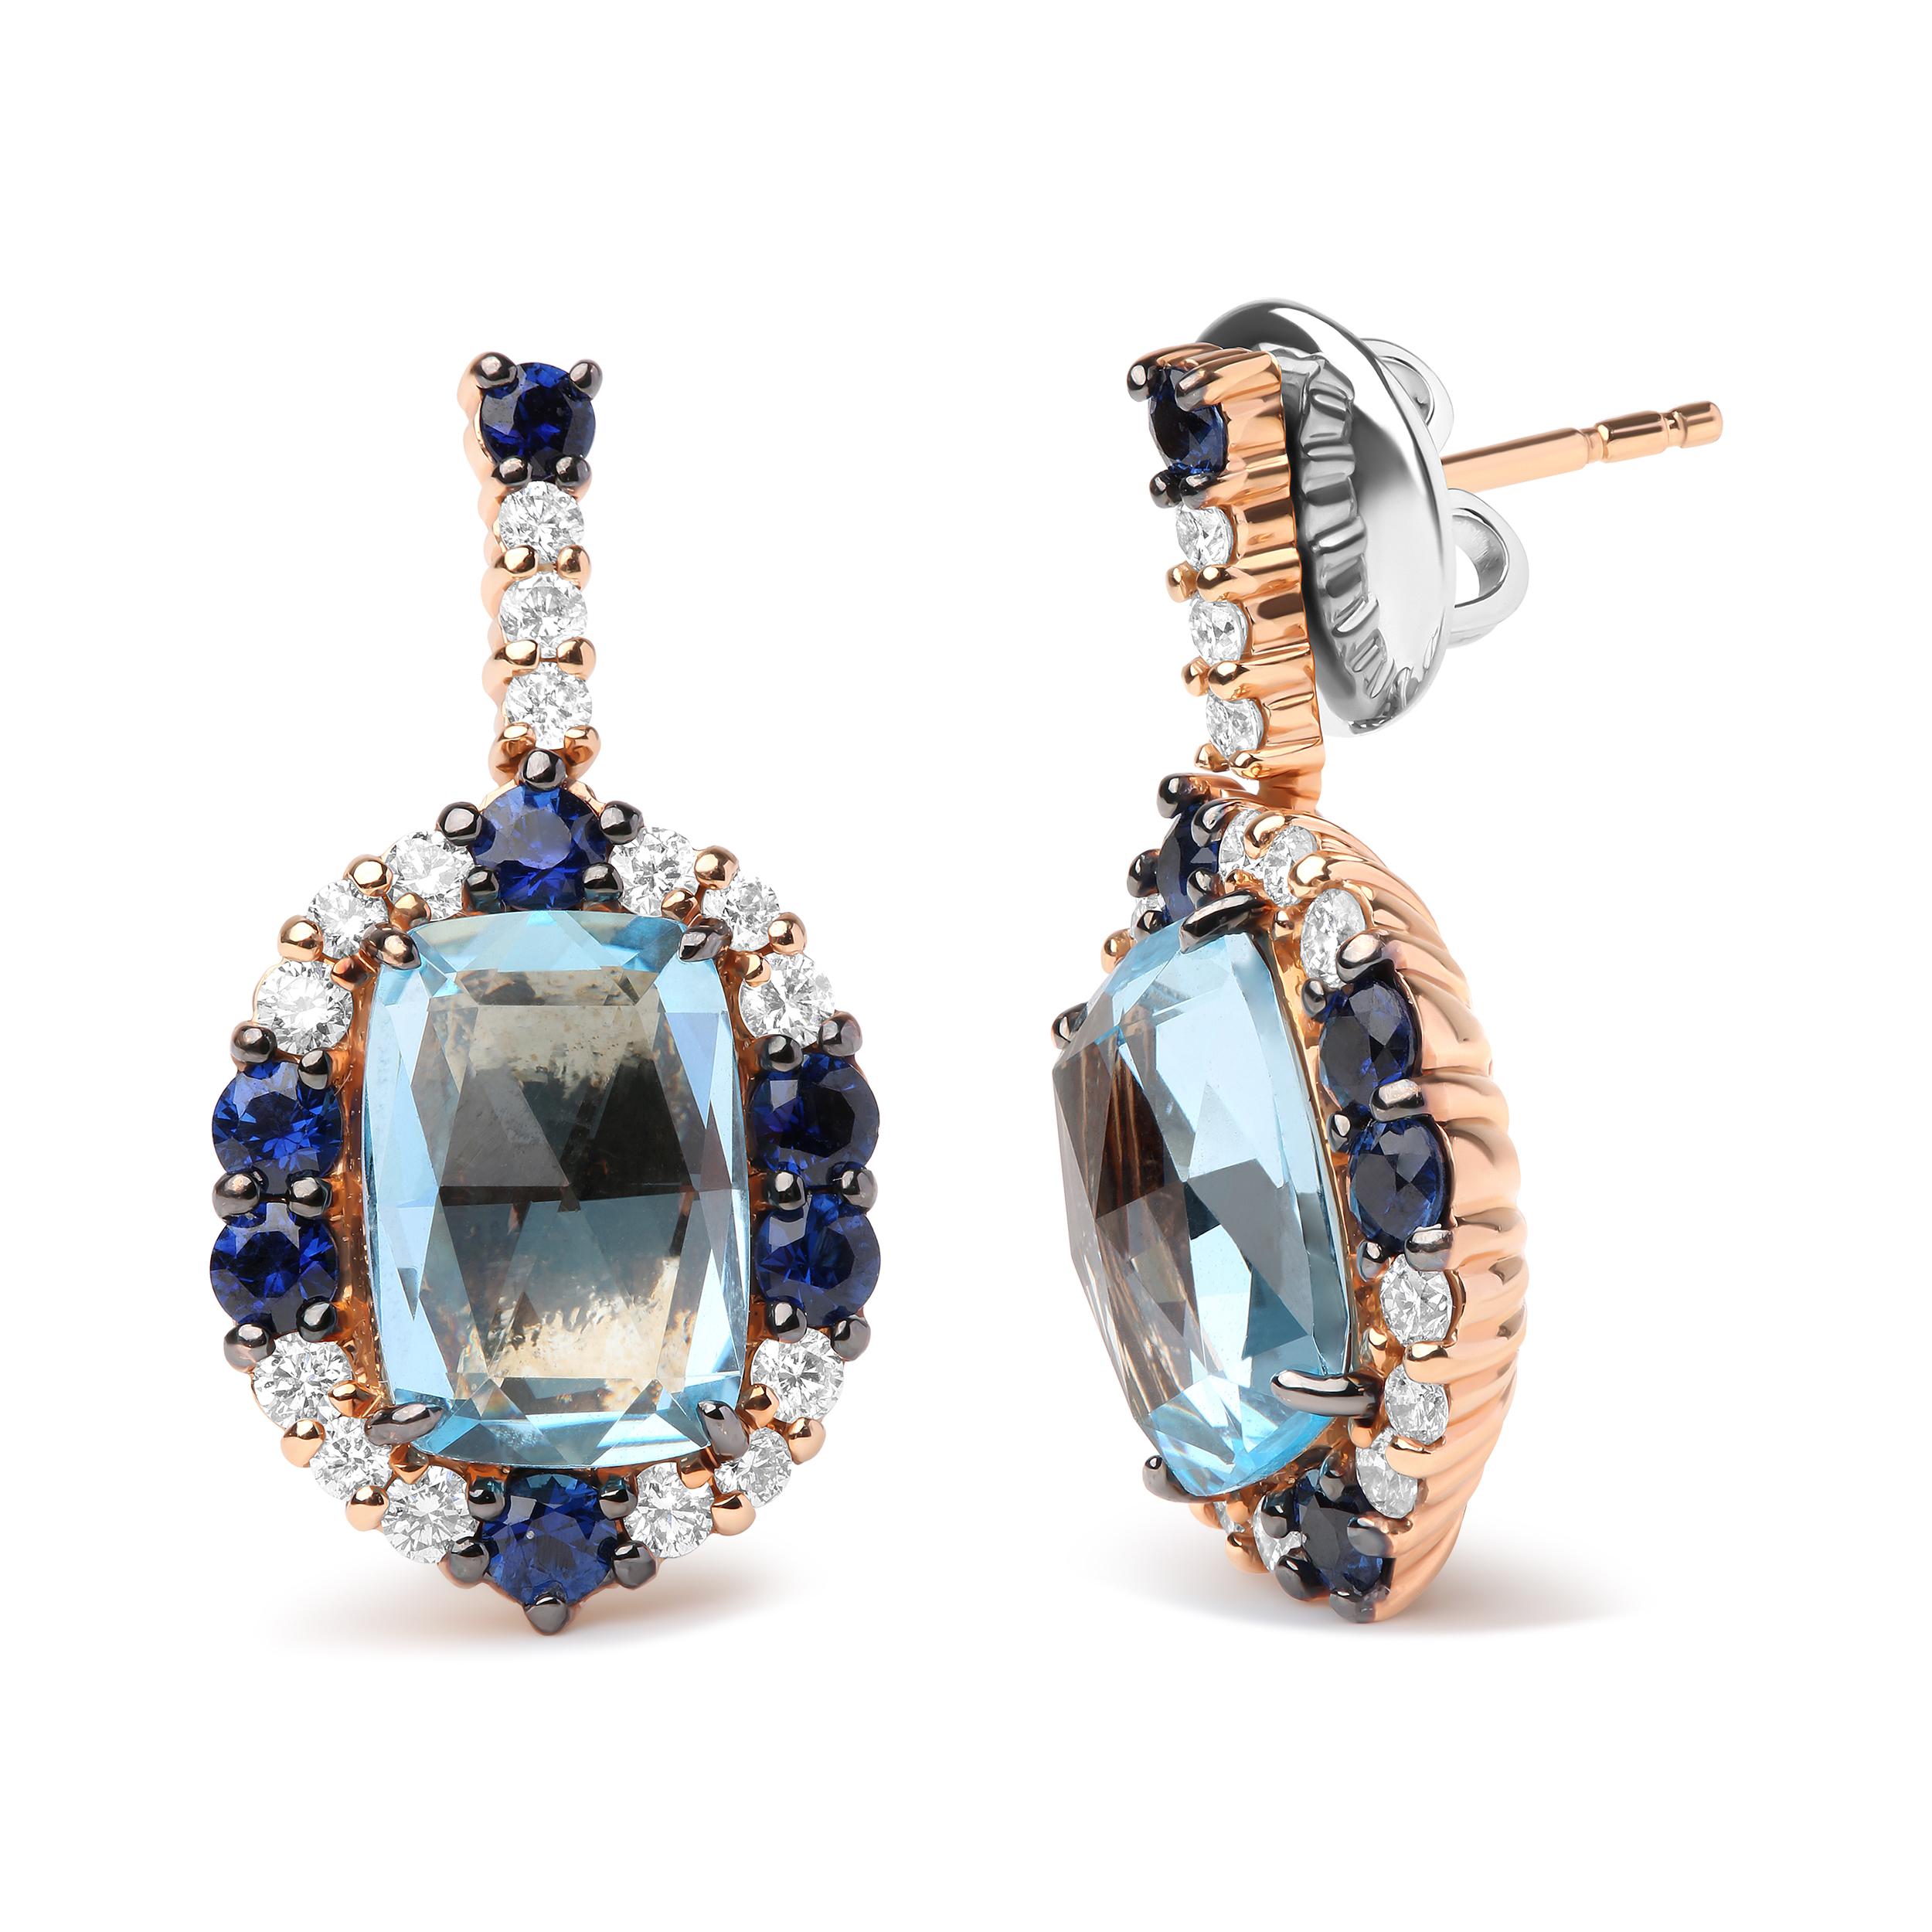 These regal dangle earrings are radiant and ready for any occasion, crafted from genuine 18k white and rose gold. A bold, eye-catching natural 13x8mm cushion-cut sky blue topaz gemstone takes center stage in a 4-prong setting. A halo of natural